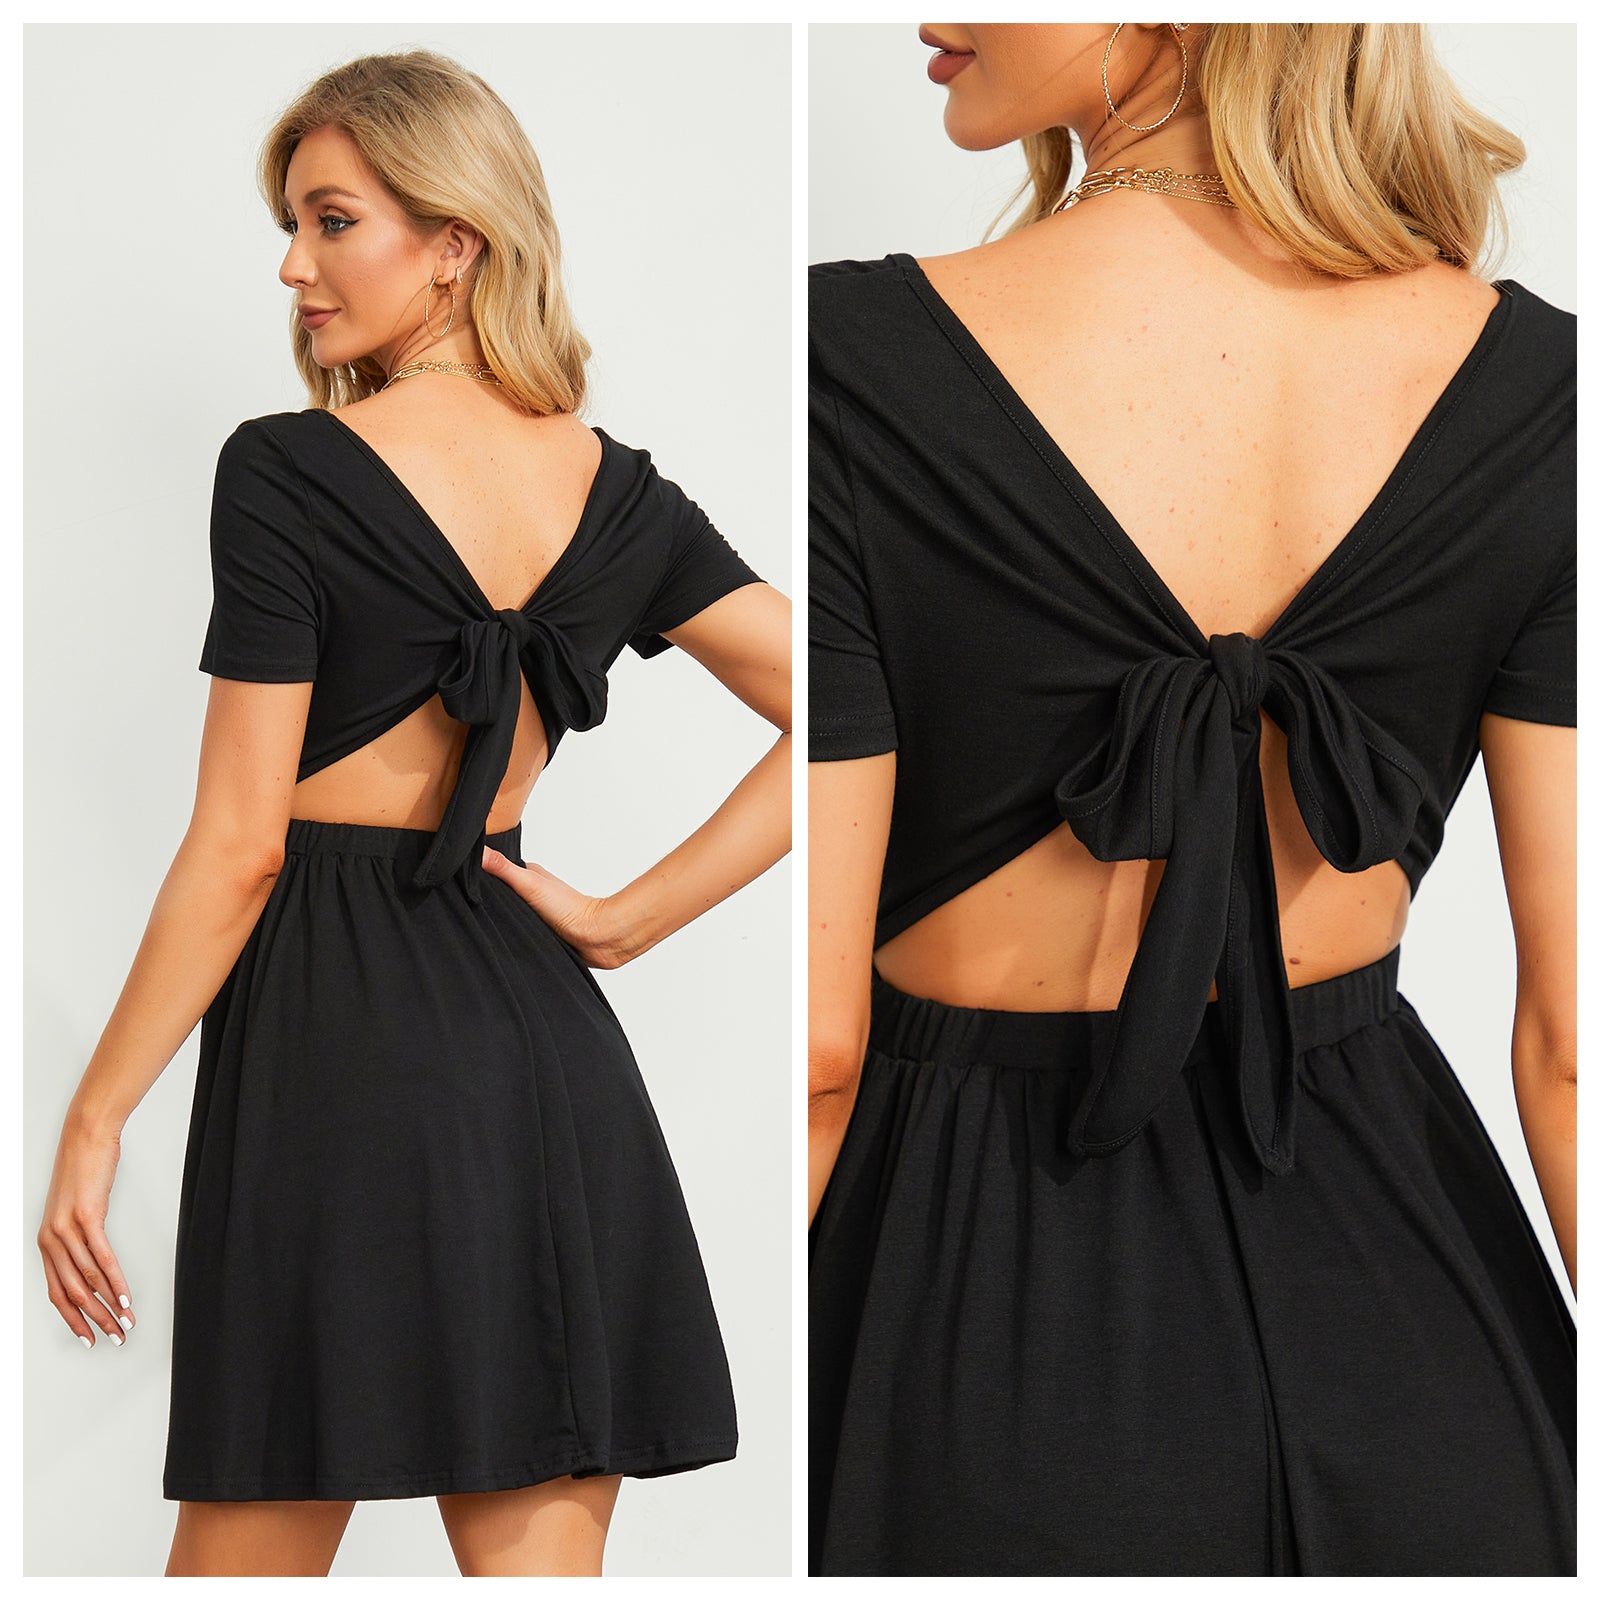 Backless Tennis Golf Dress with a Square Neckline